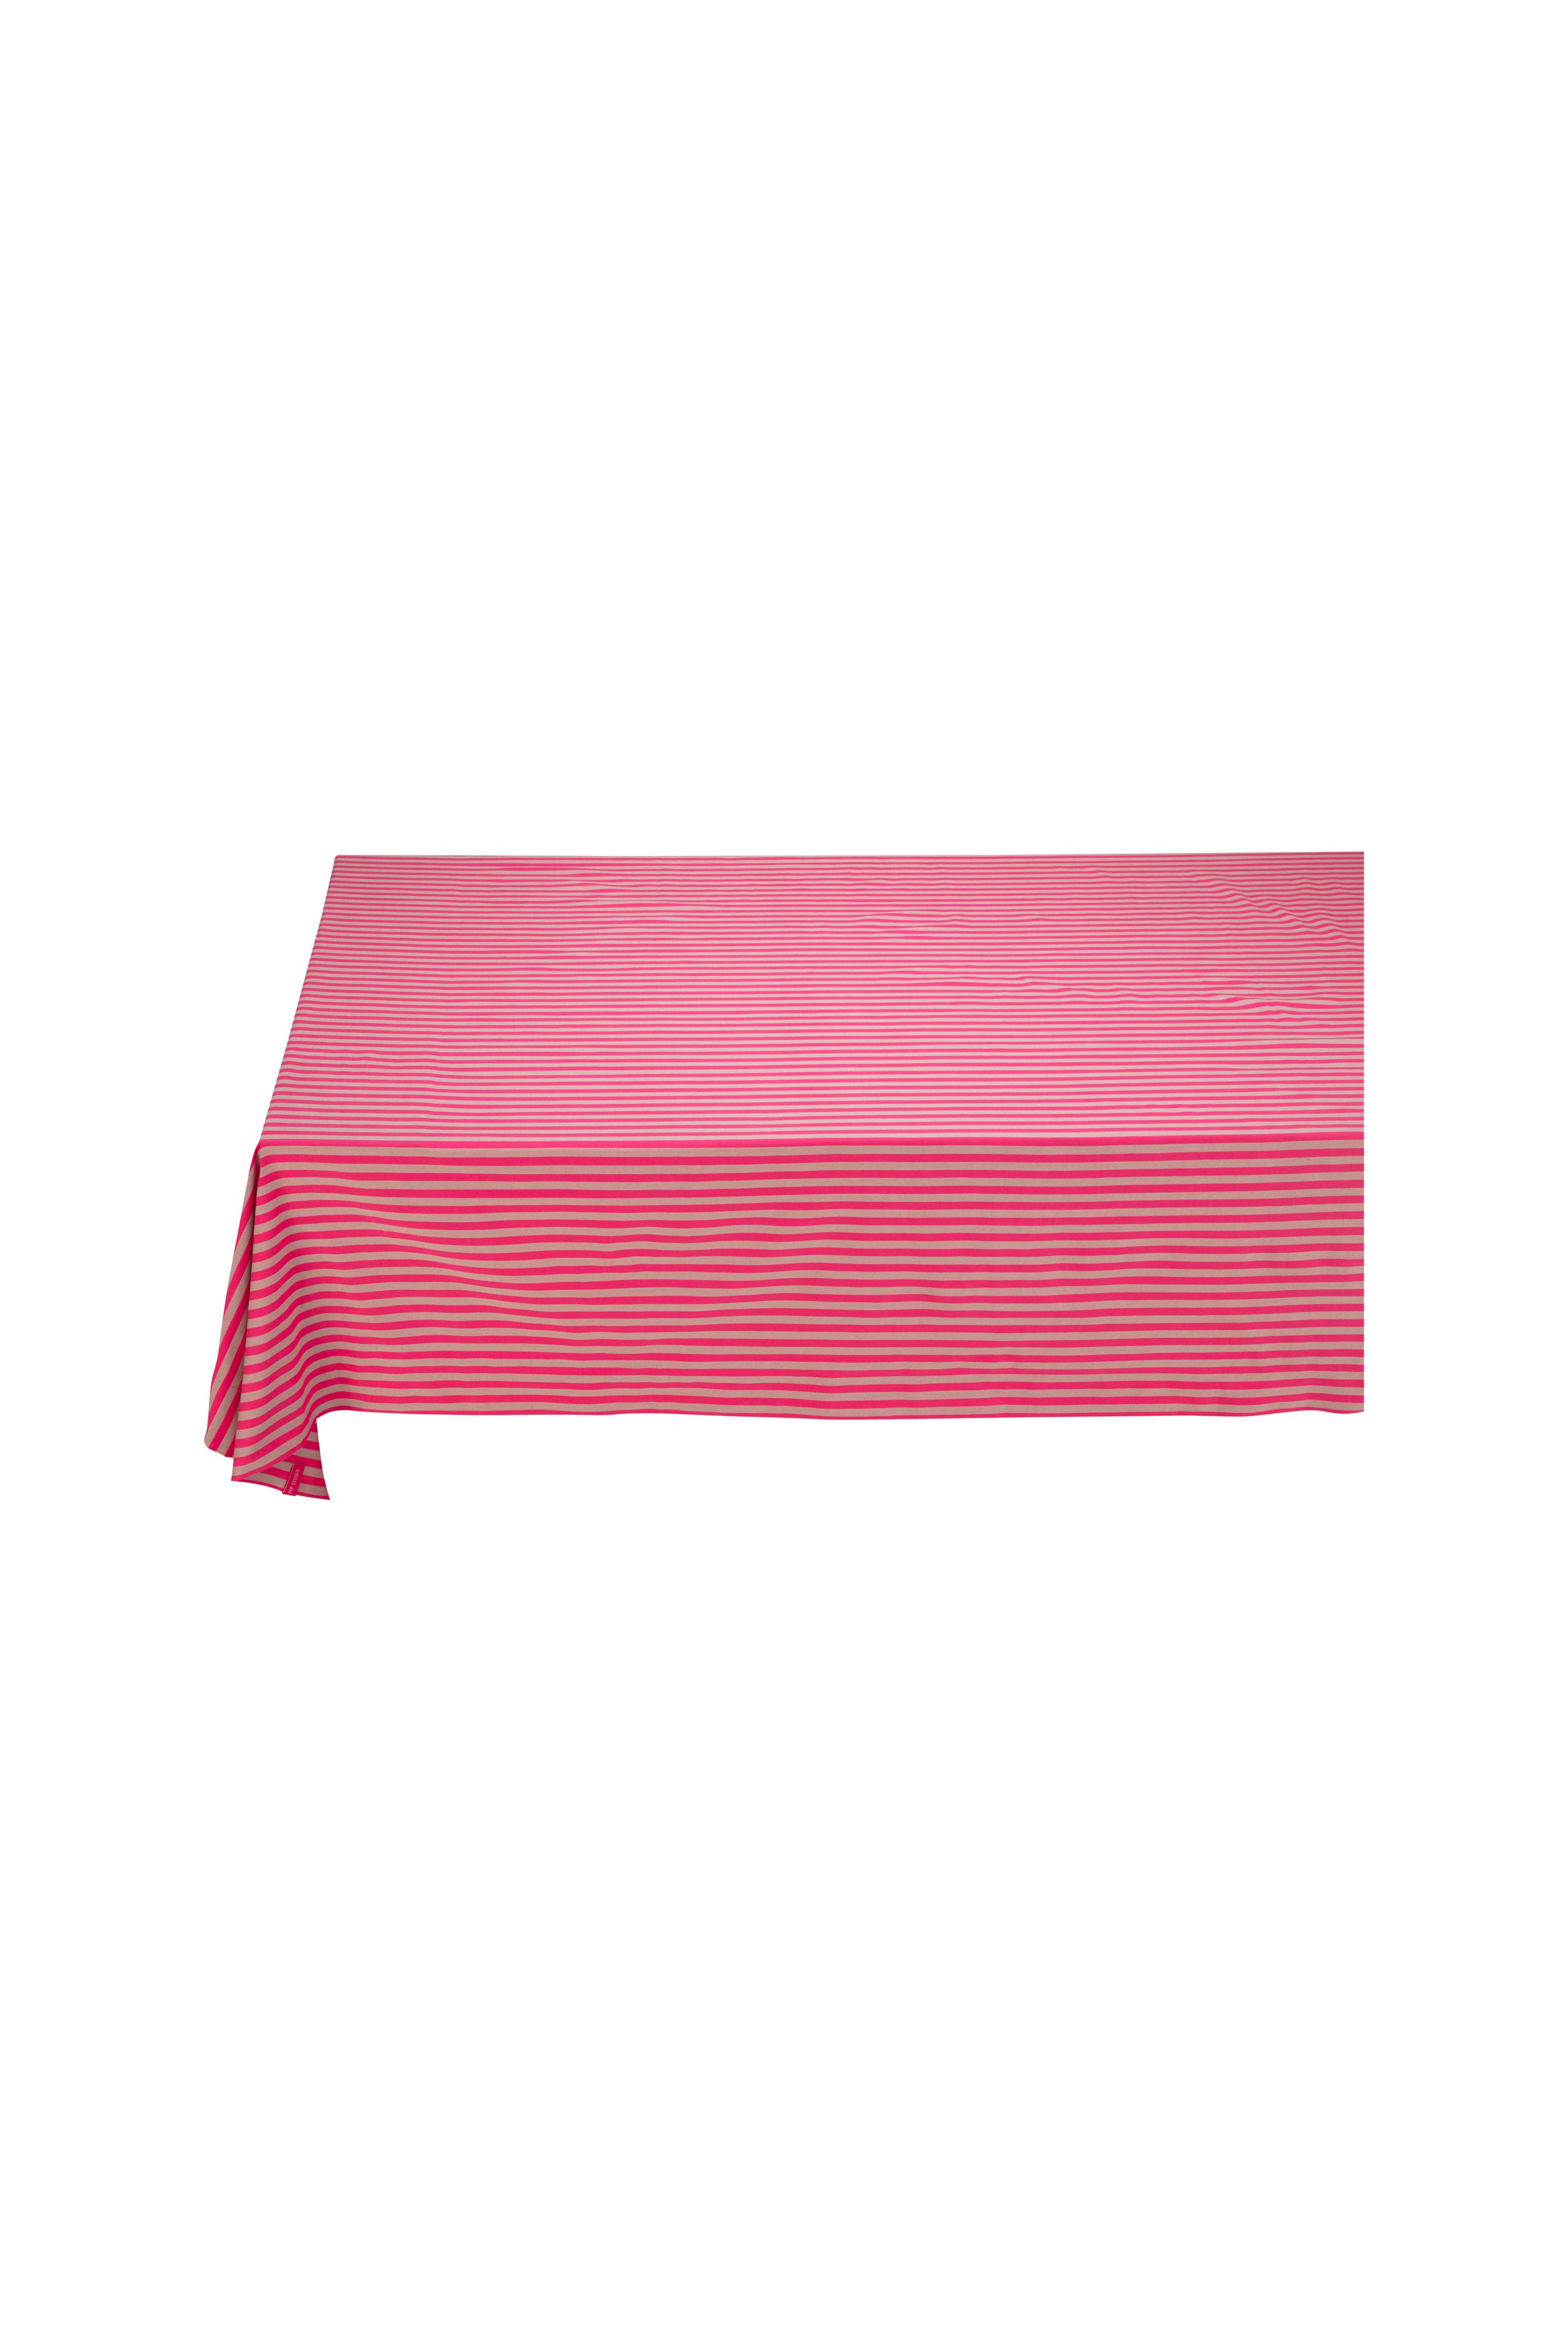 Table Cloth Stripes Pink 180x300cm Gift